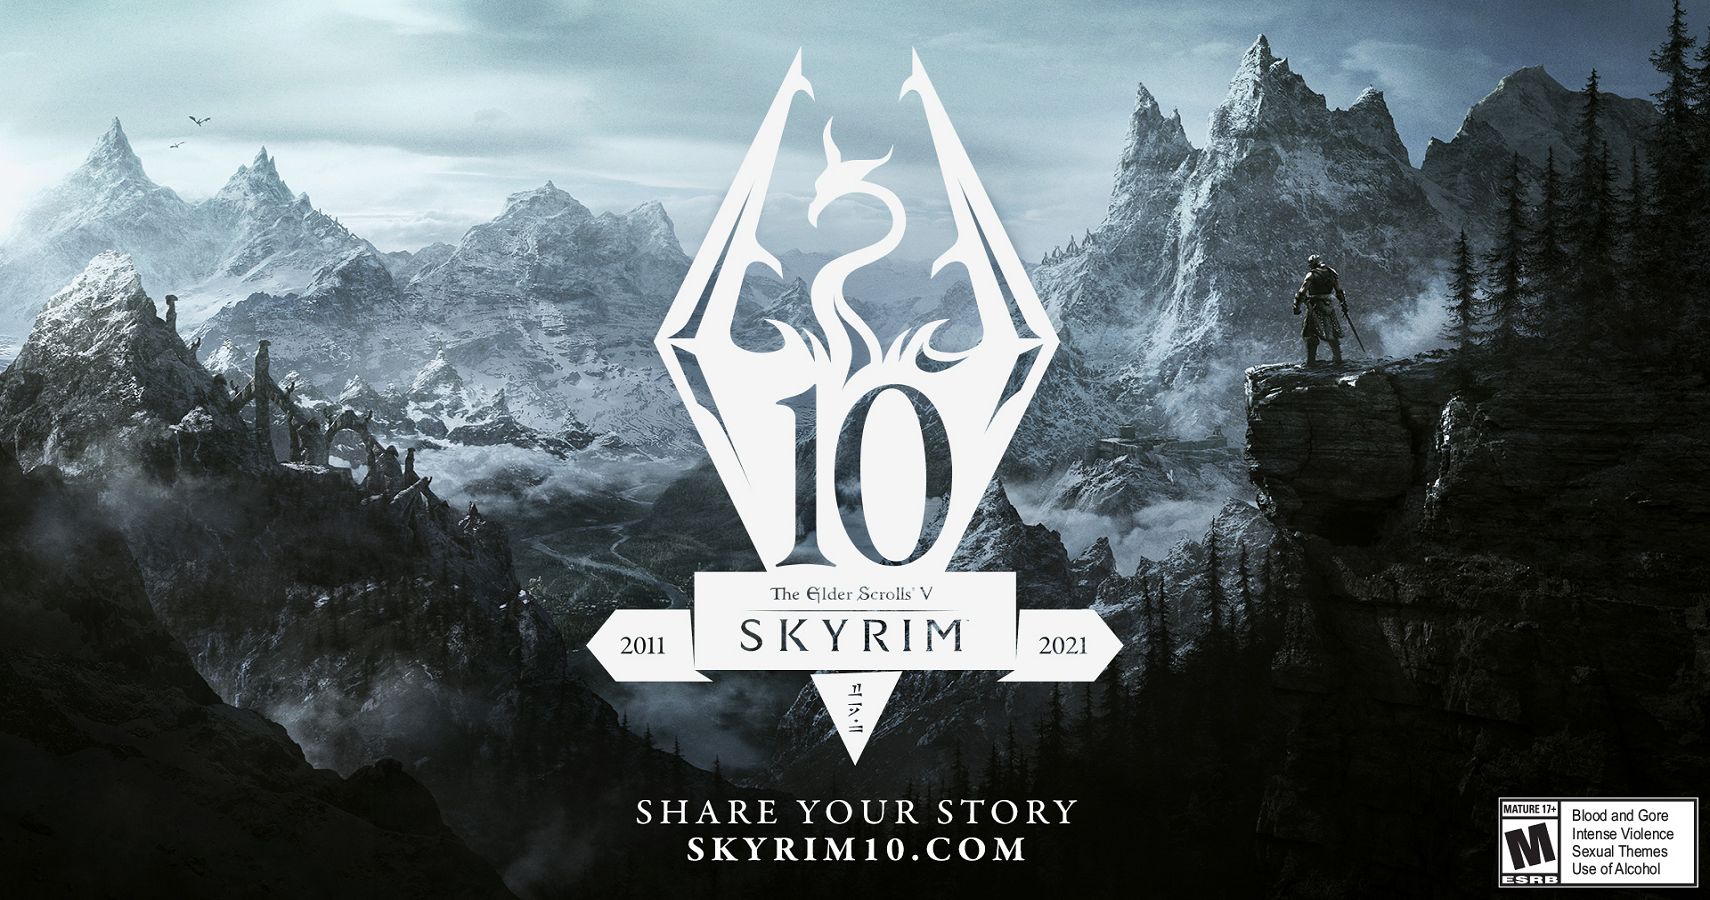 Skyrim Preps for Its Ten-Year Anniversary With A Contest